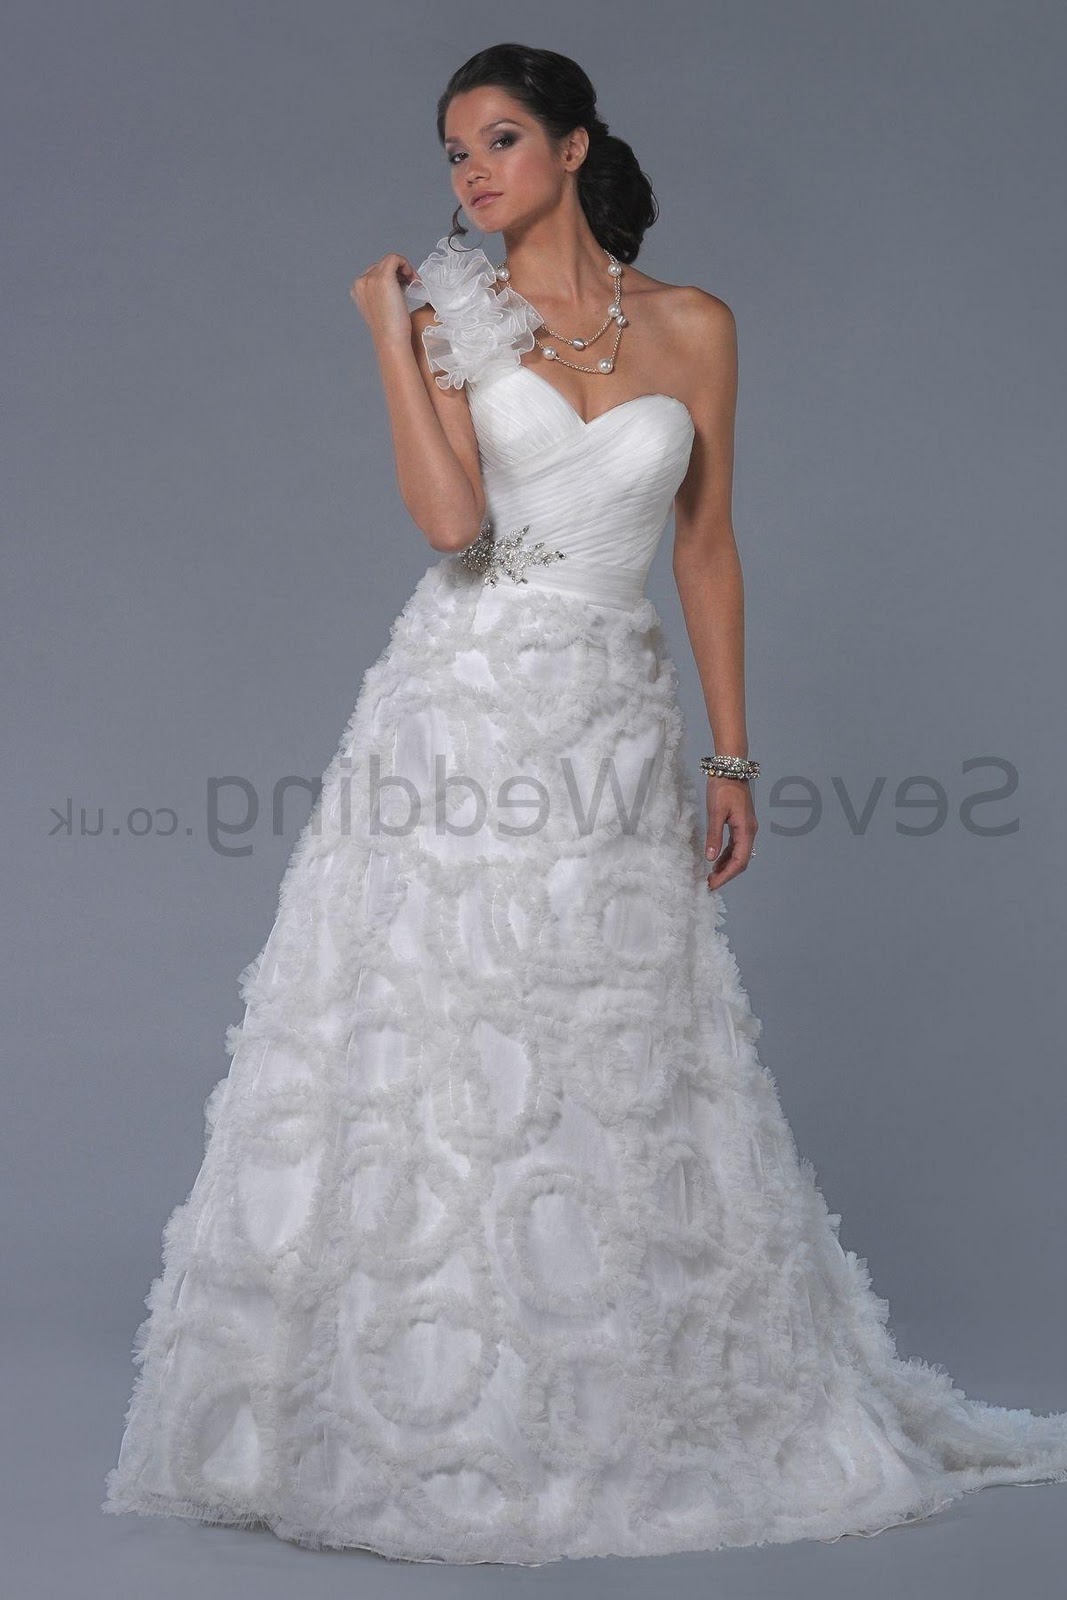 your wedding dress and I